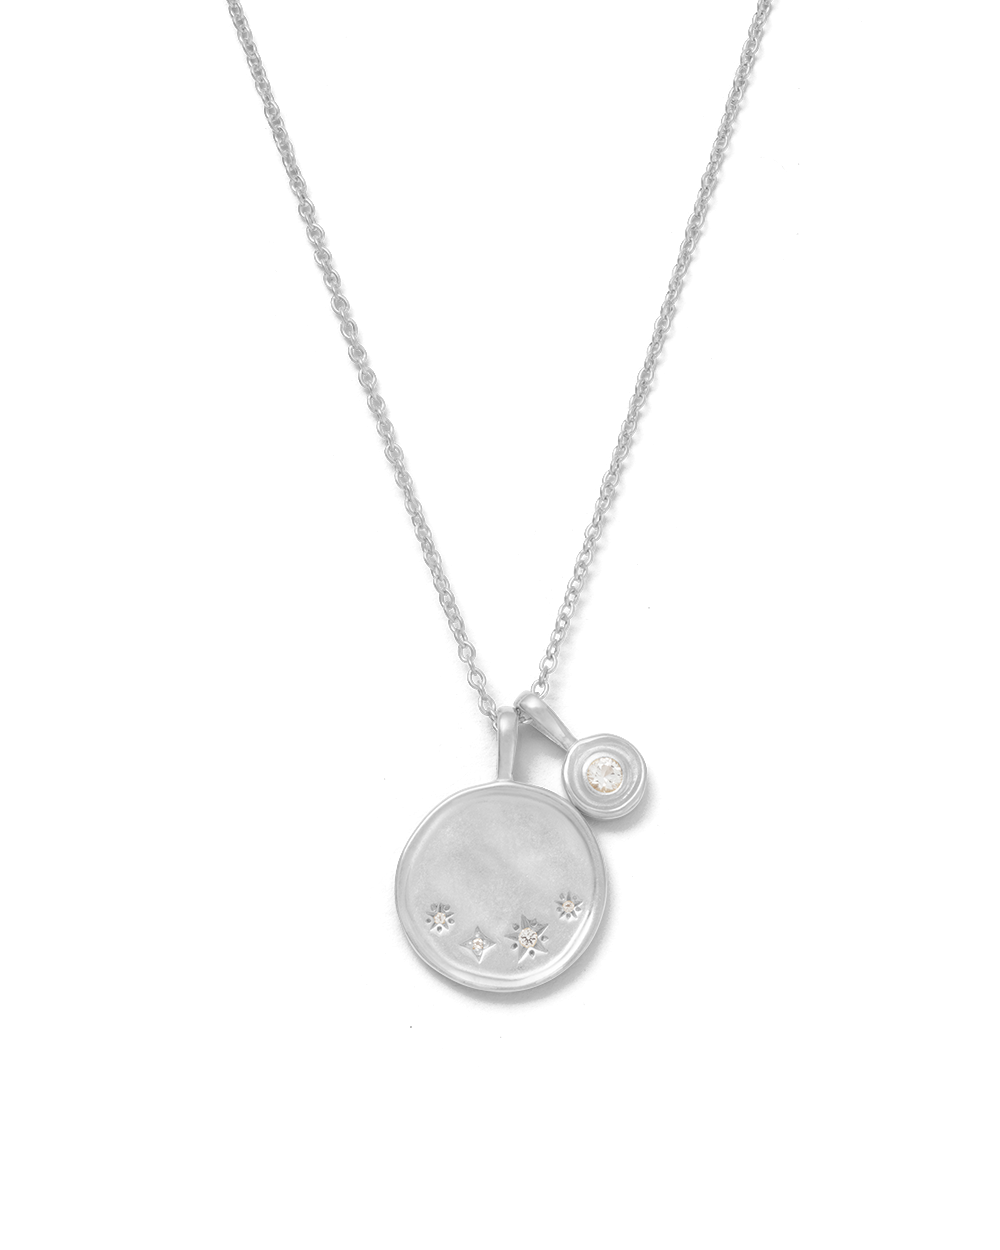 SOLSTICE NECKLACE (STERLING SILVER)